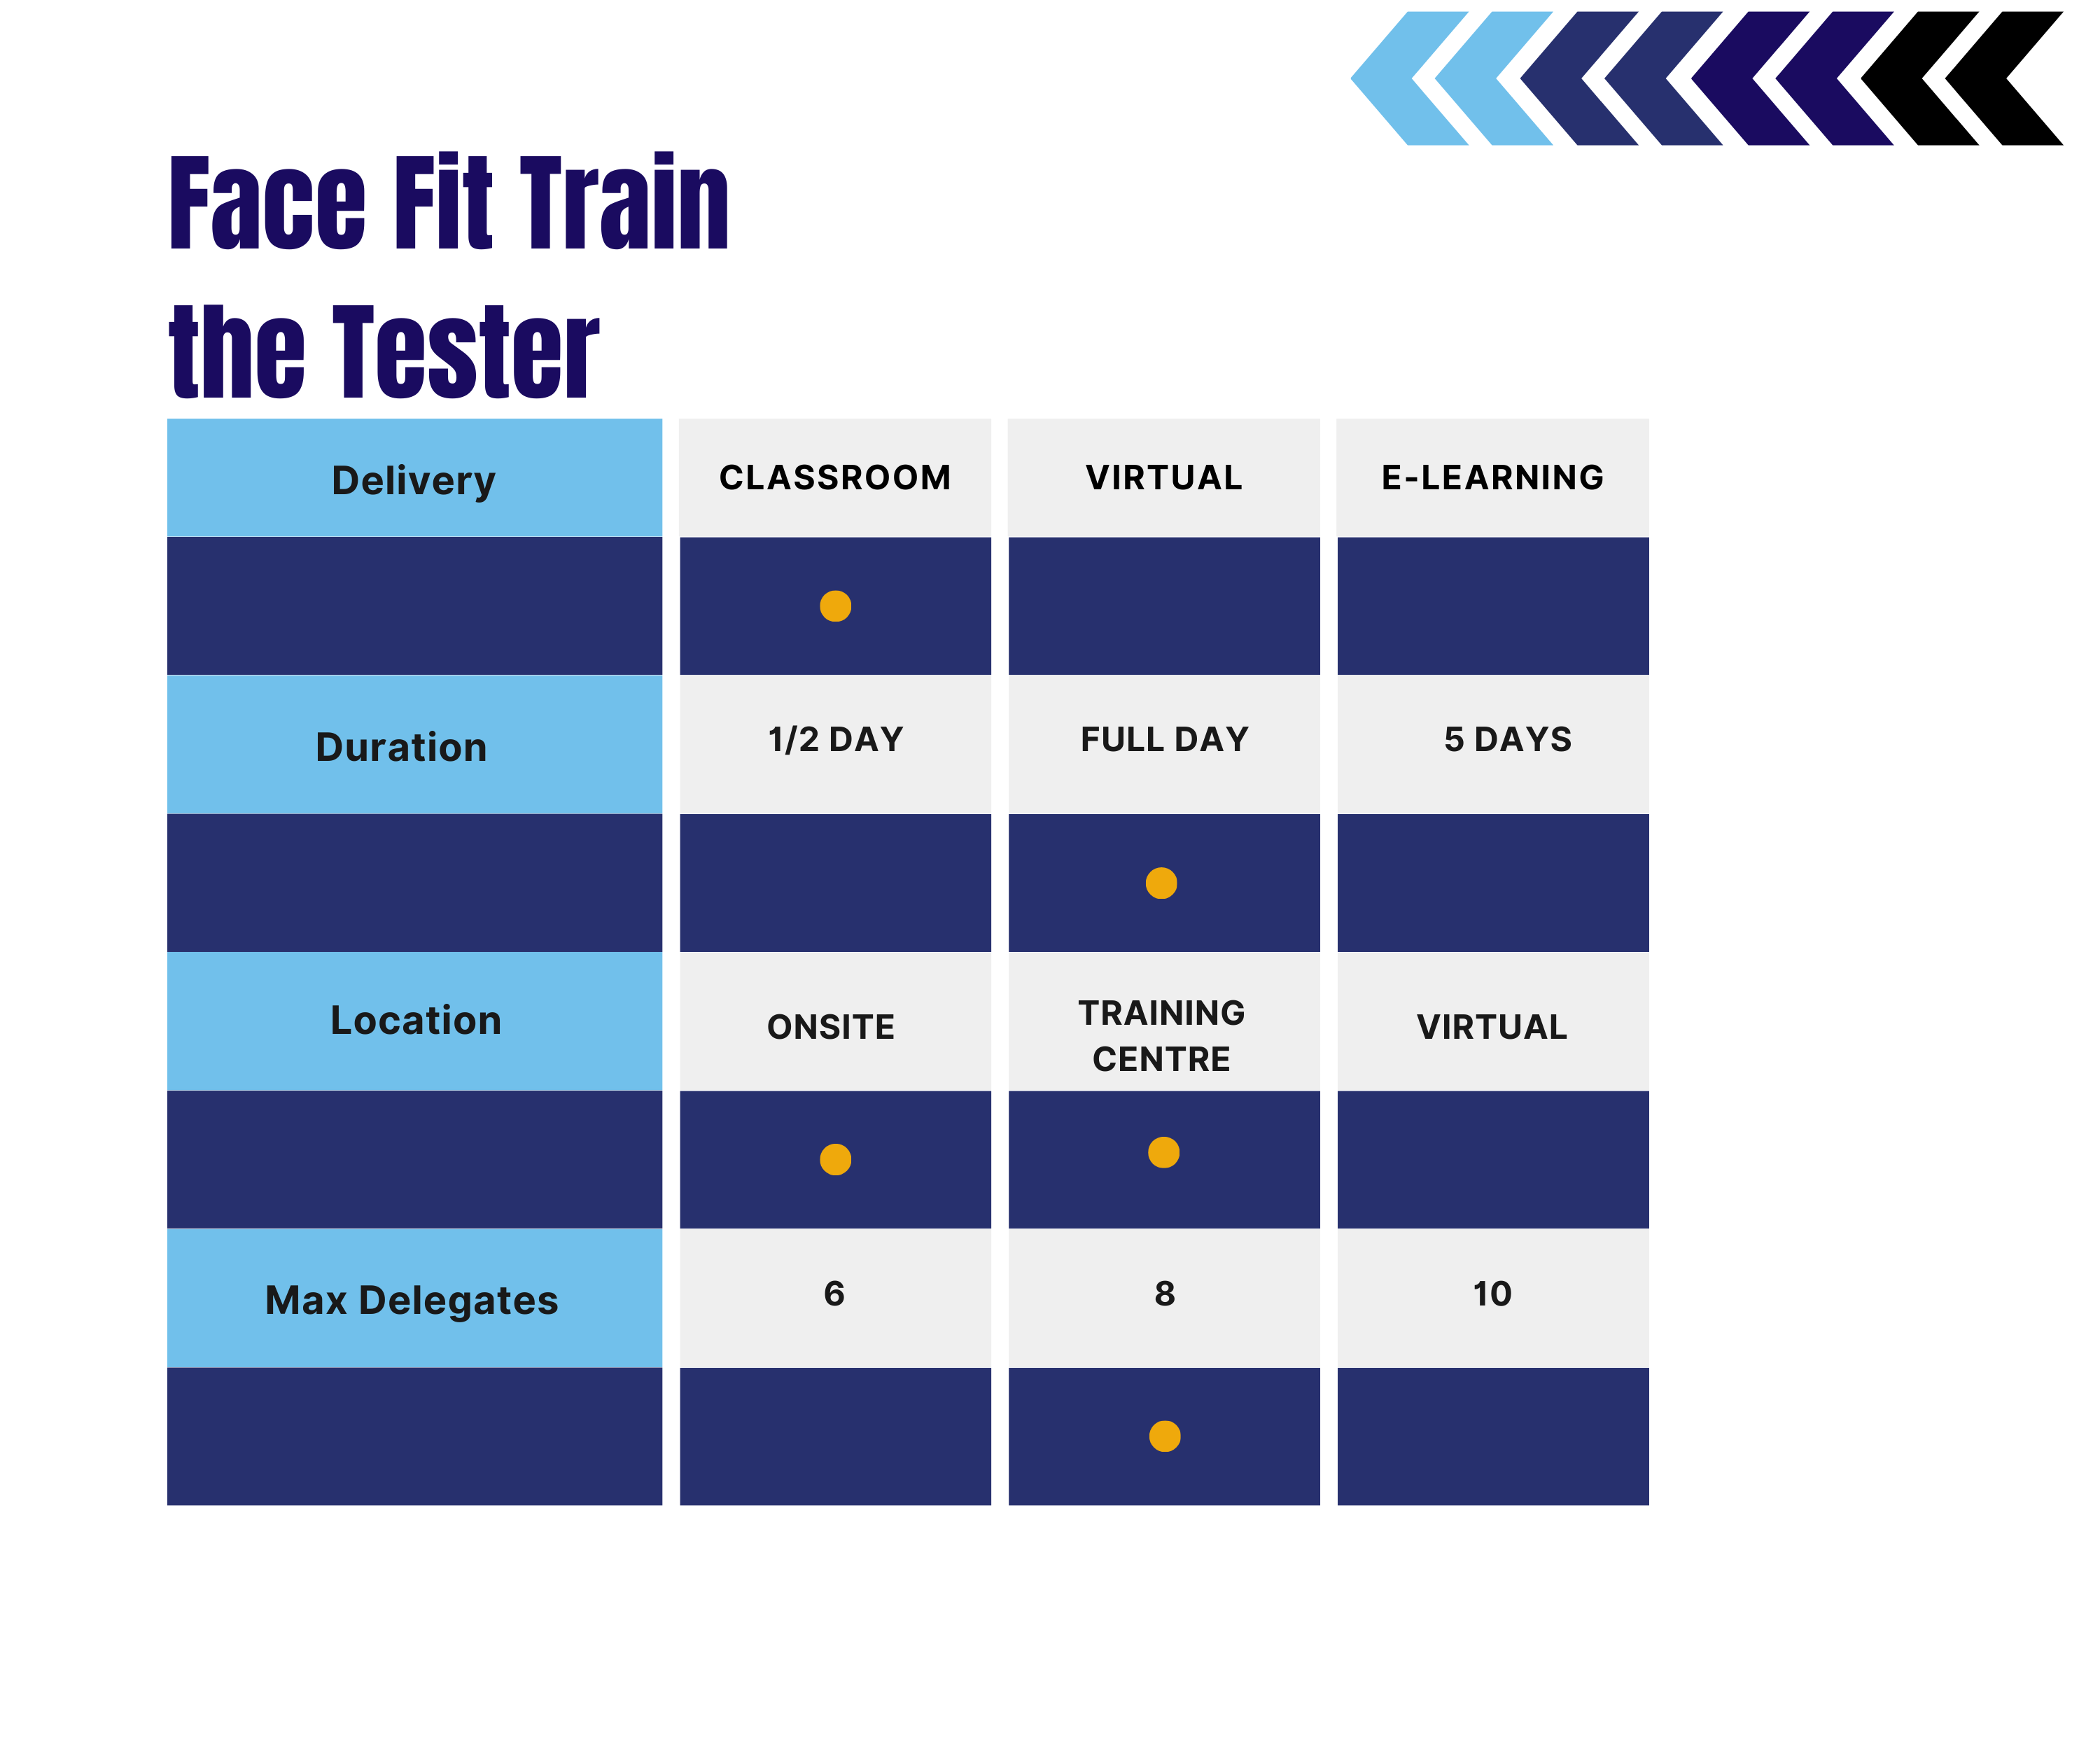 Face Fit Train the Tester